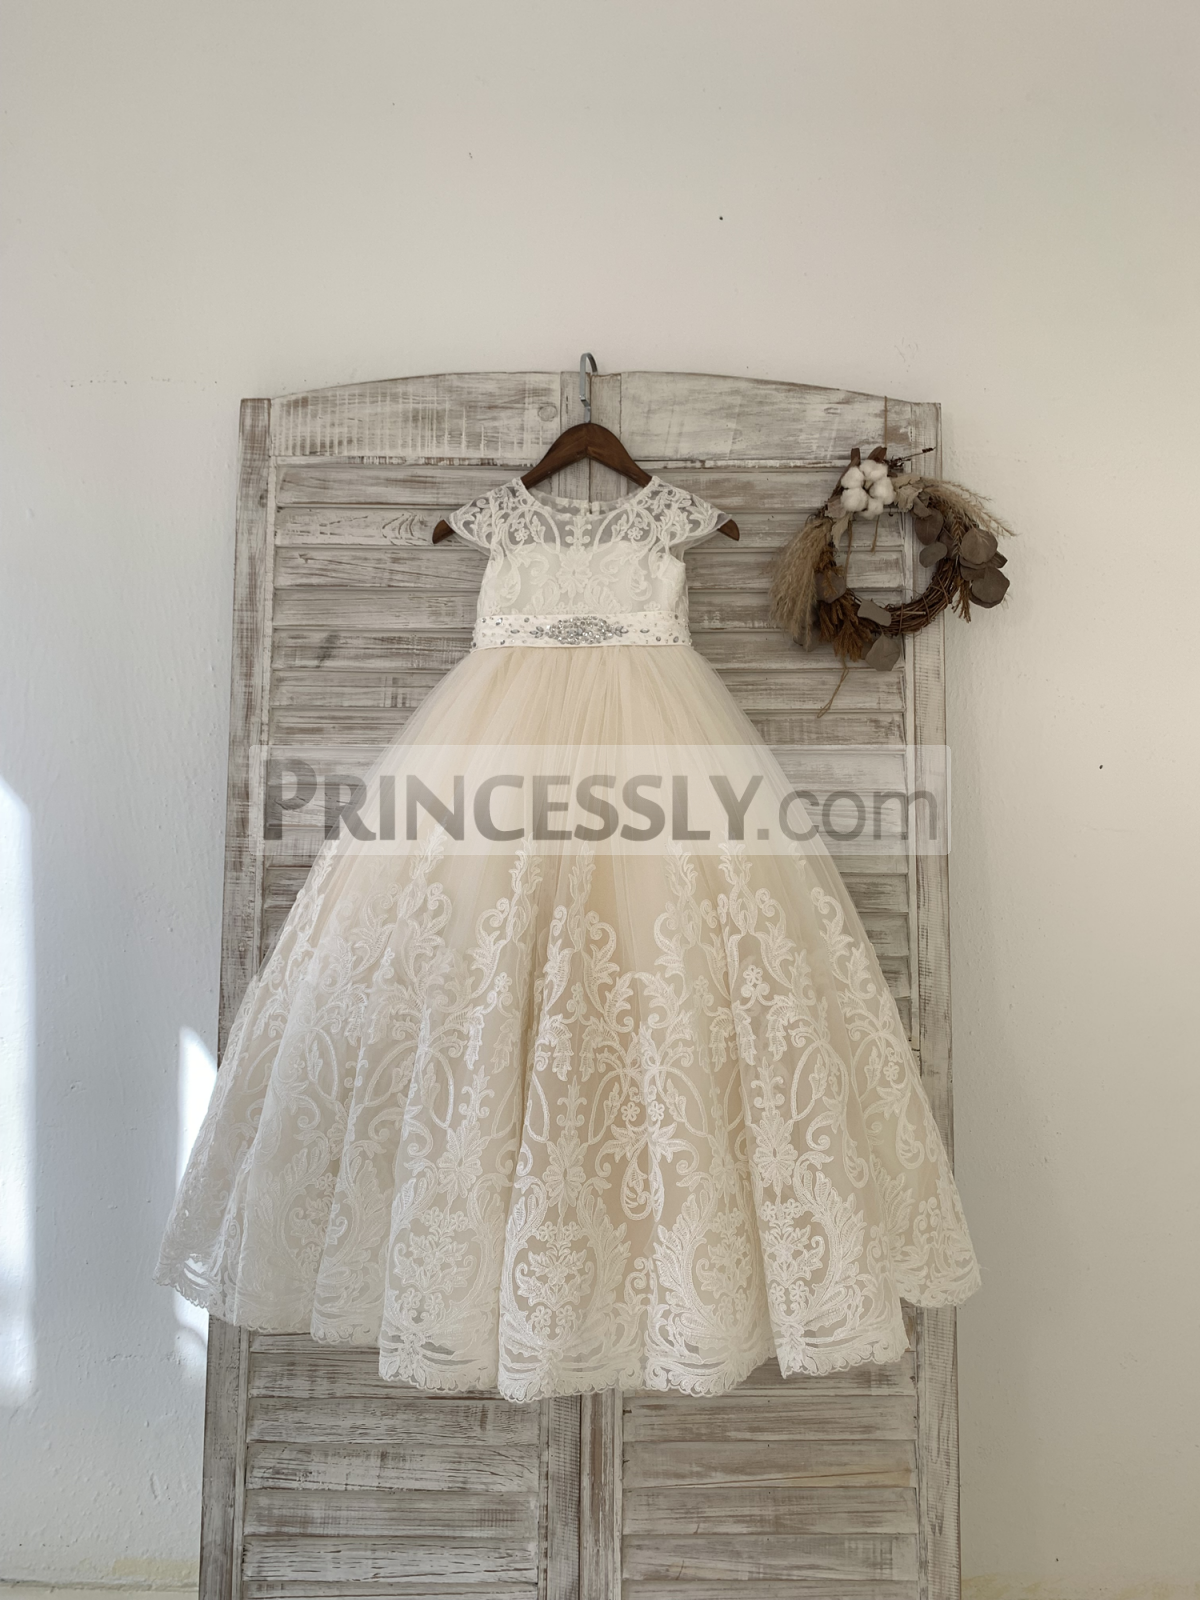 Princessly.com-K1004195-Cap Sleeves Lace Champagne Tulle Wedding Flower Girl Dress Kids Party Dress with Beaded Belt-31